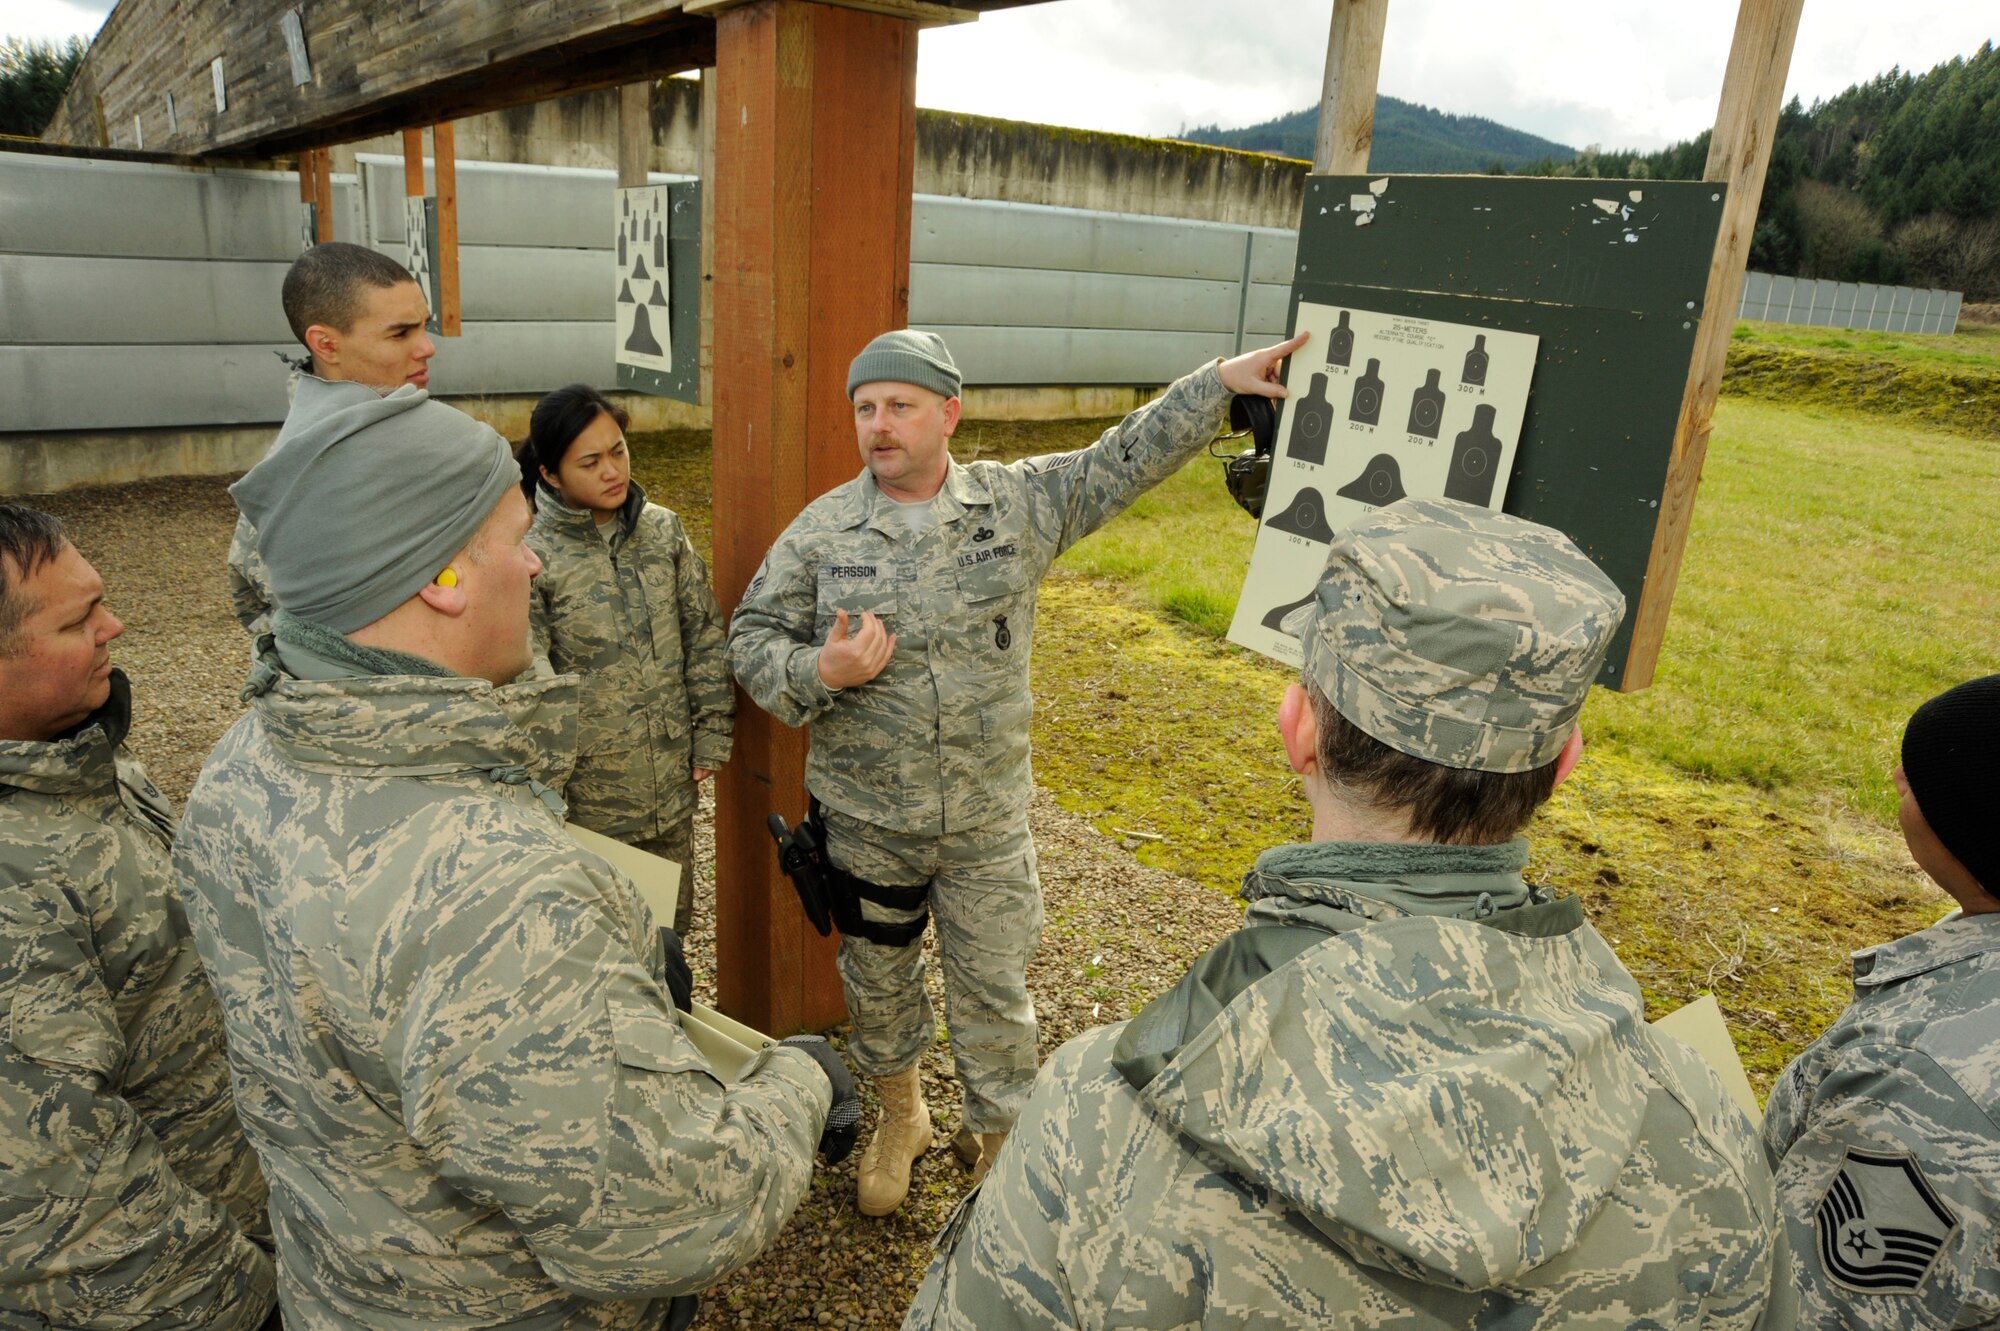 Oregon Air National Guard Master Sgt. Paul Persson 116th ACS Security Forces, describes in detail, the firing targets that all of the Airmen of the 116th Air Control Squadron need to achieve as part of their weapons qualifying at Camp Adair, Ore., on February 17, 2011. Over 80 Airmen of the 116th ACS will deploy in March of 2010 to the Middle East in support of Operation Enduring Freedom. (U.S. Air Force photograph by Tech. Sgt. John Hughel, 142nd Fighter Wing Public Affairs)